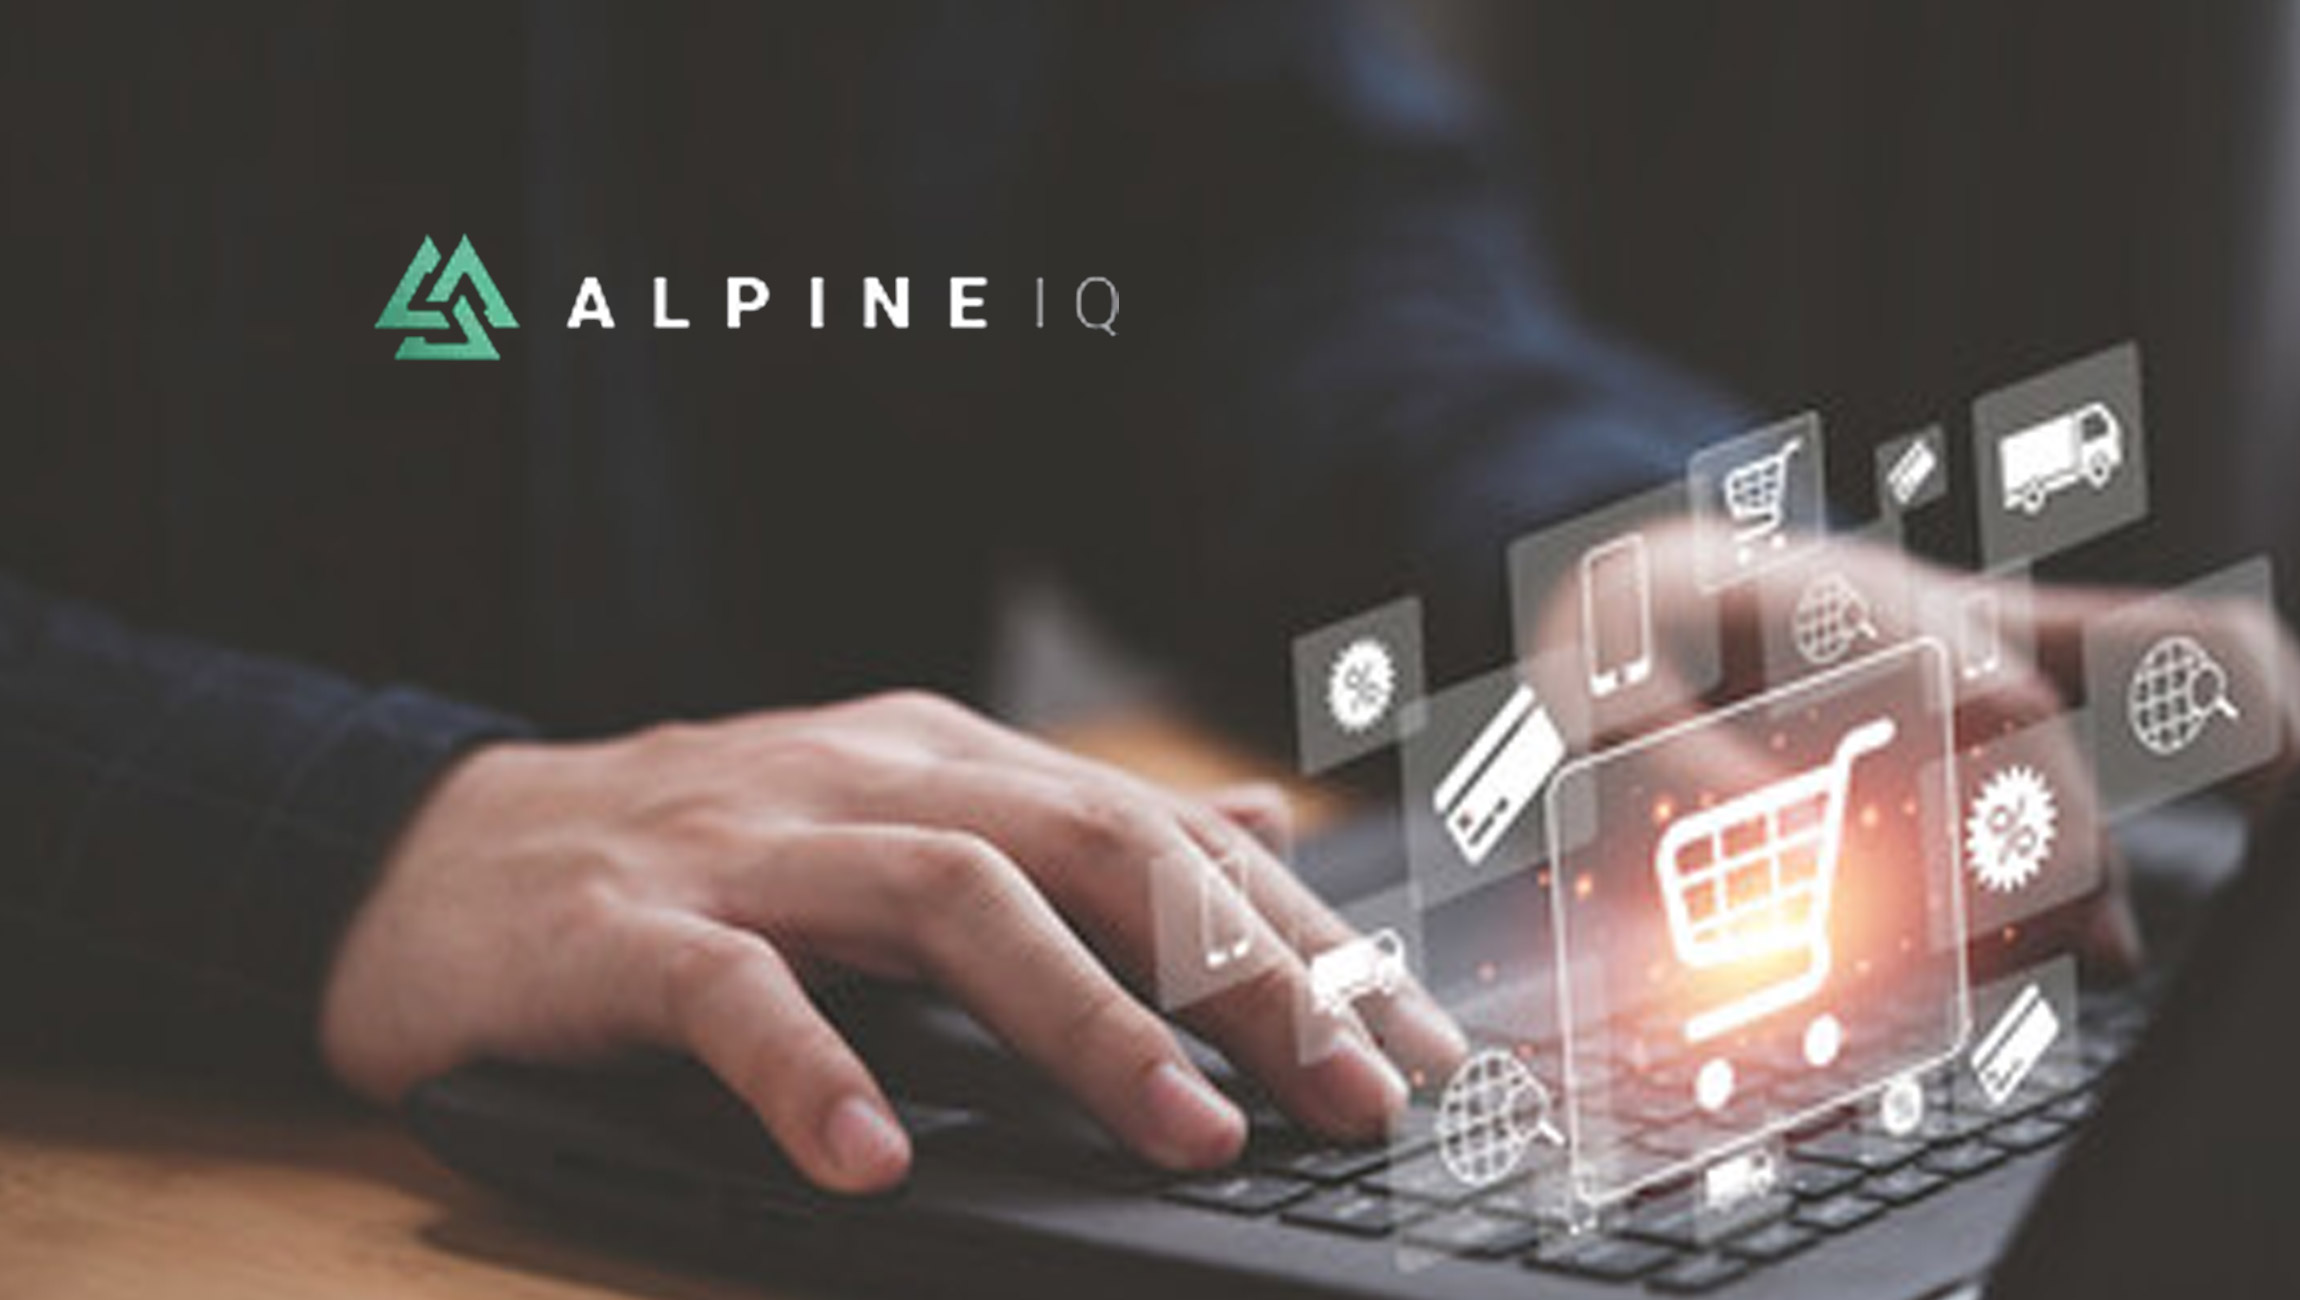 Alpine IQ Introduces Geofence Messaging, Enabling Retailers and Brands to Send Location Based Campaigns to Customers 1